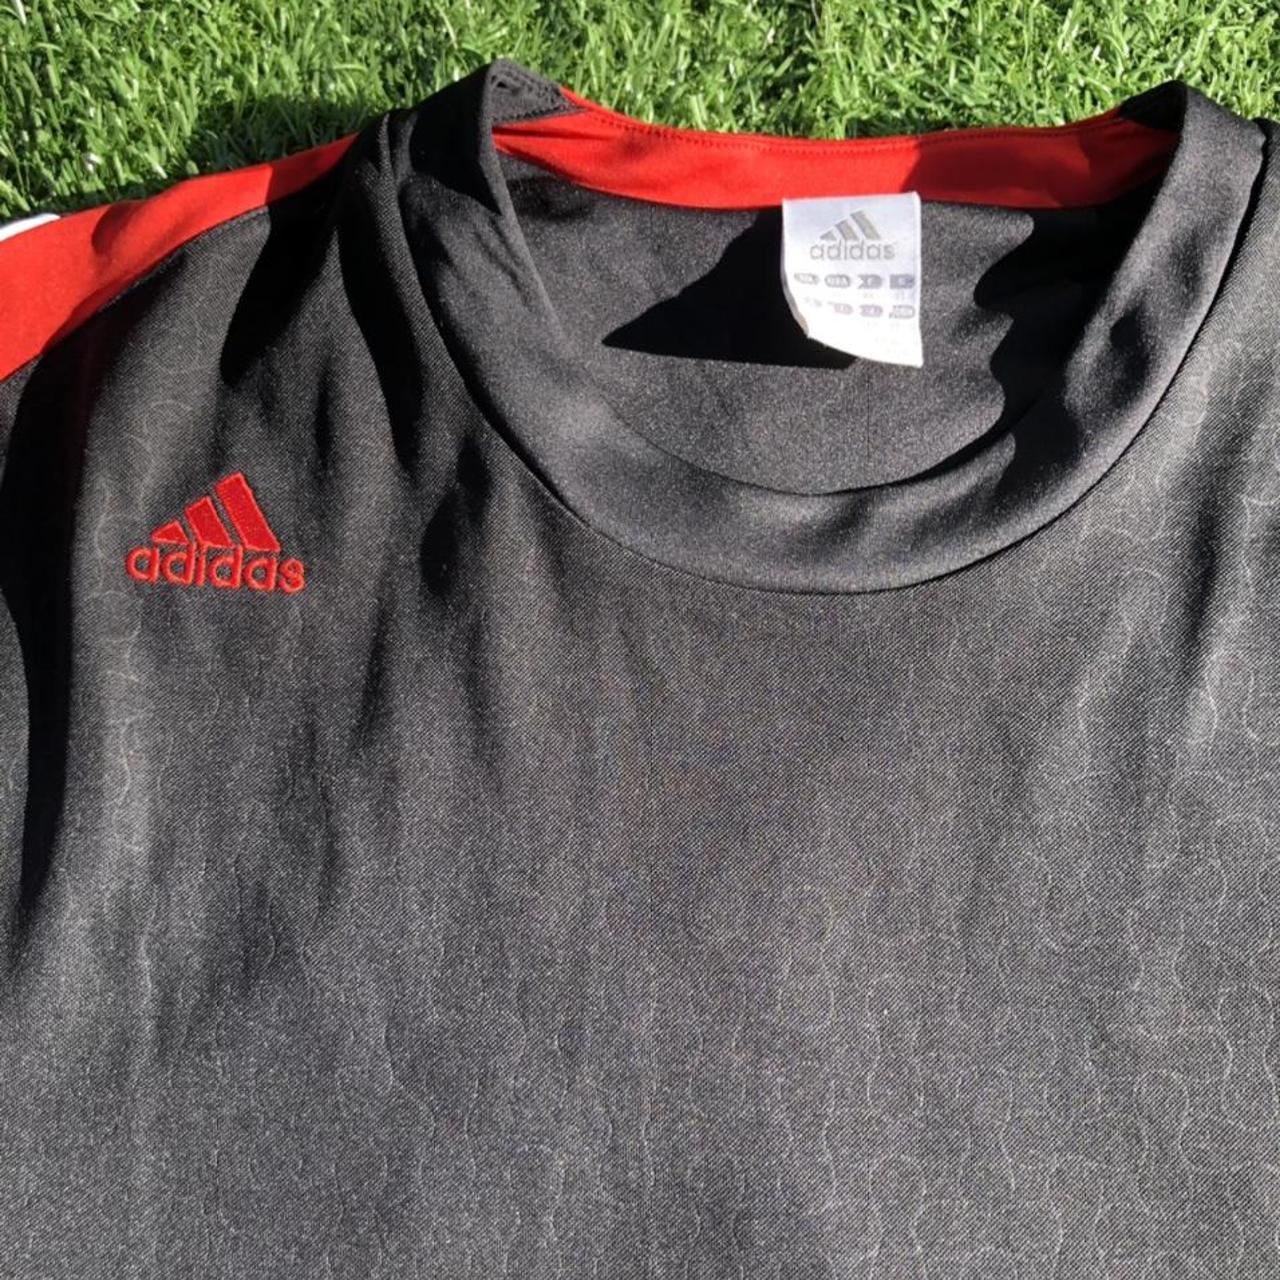 Product Image 2 - Adidas Climacool Sports Training Top
-